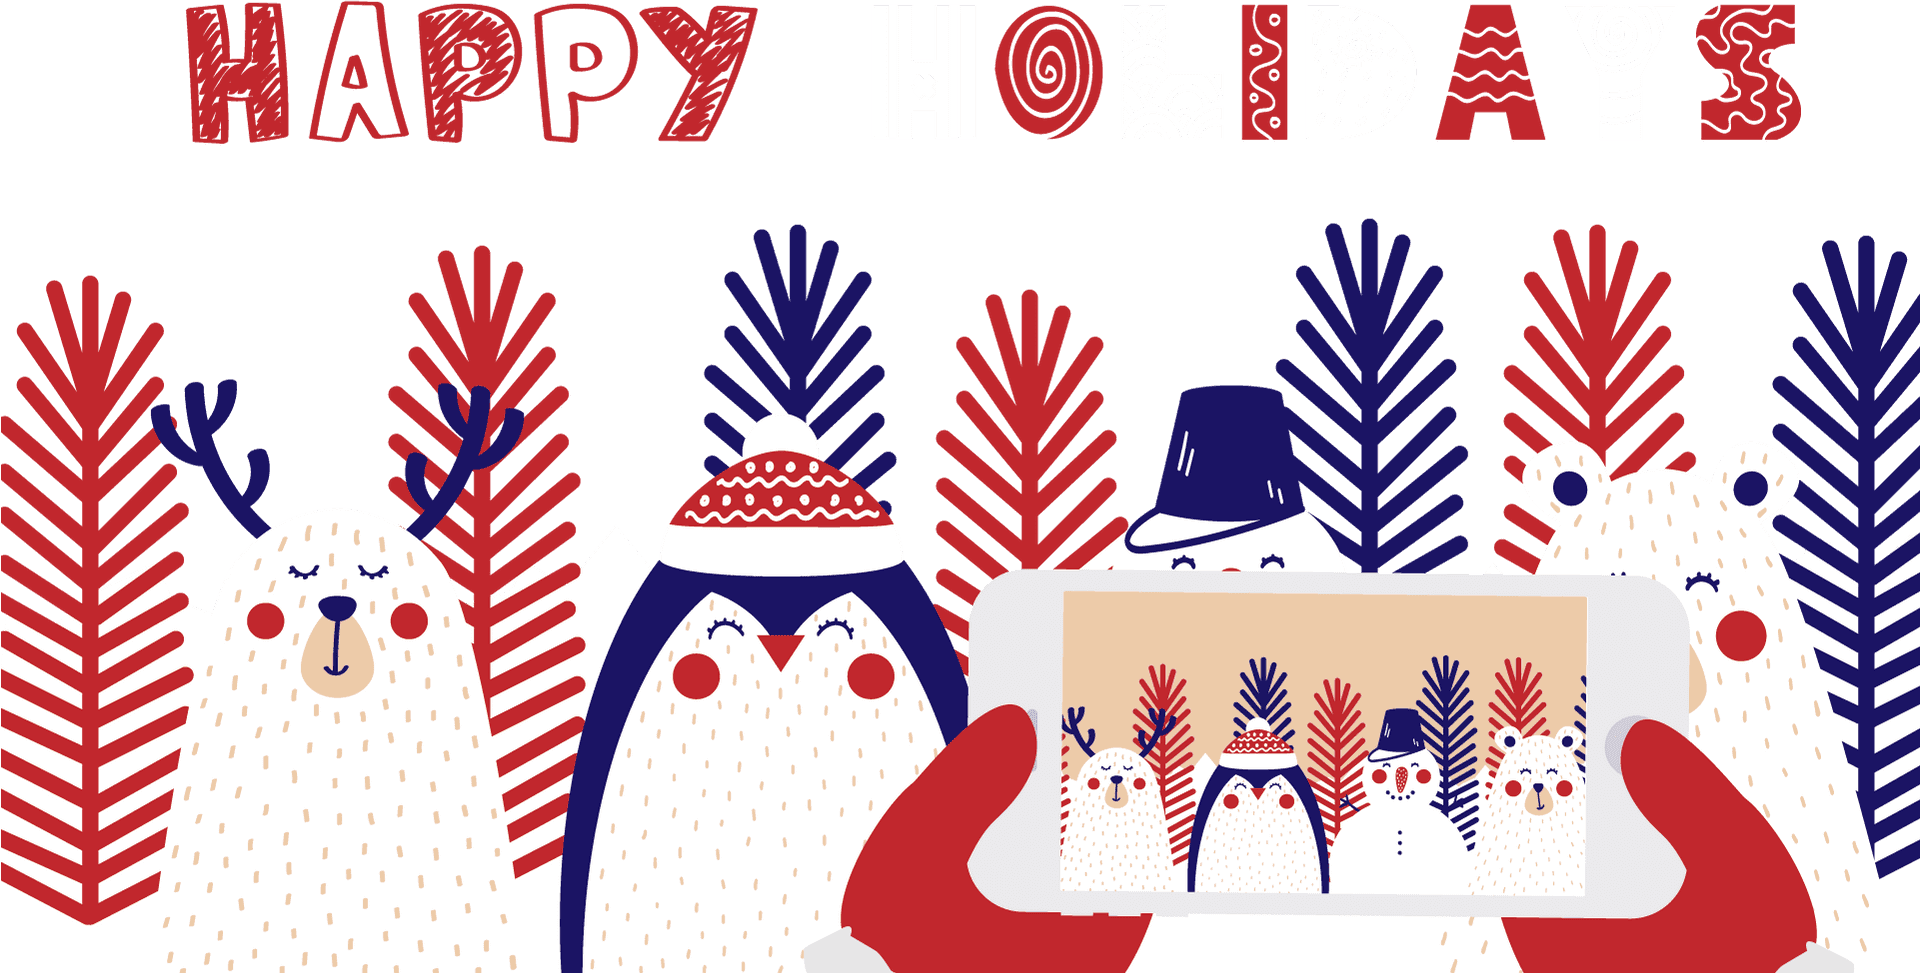 Festive Animals Selfie Holiday Greeting PNG image